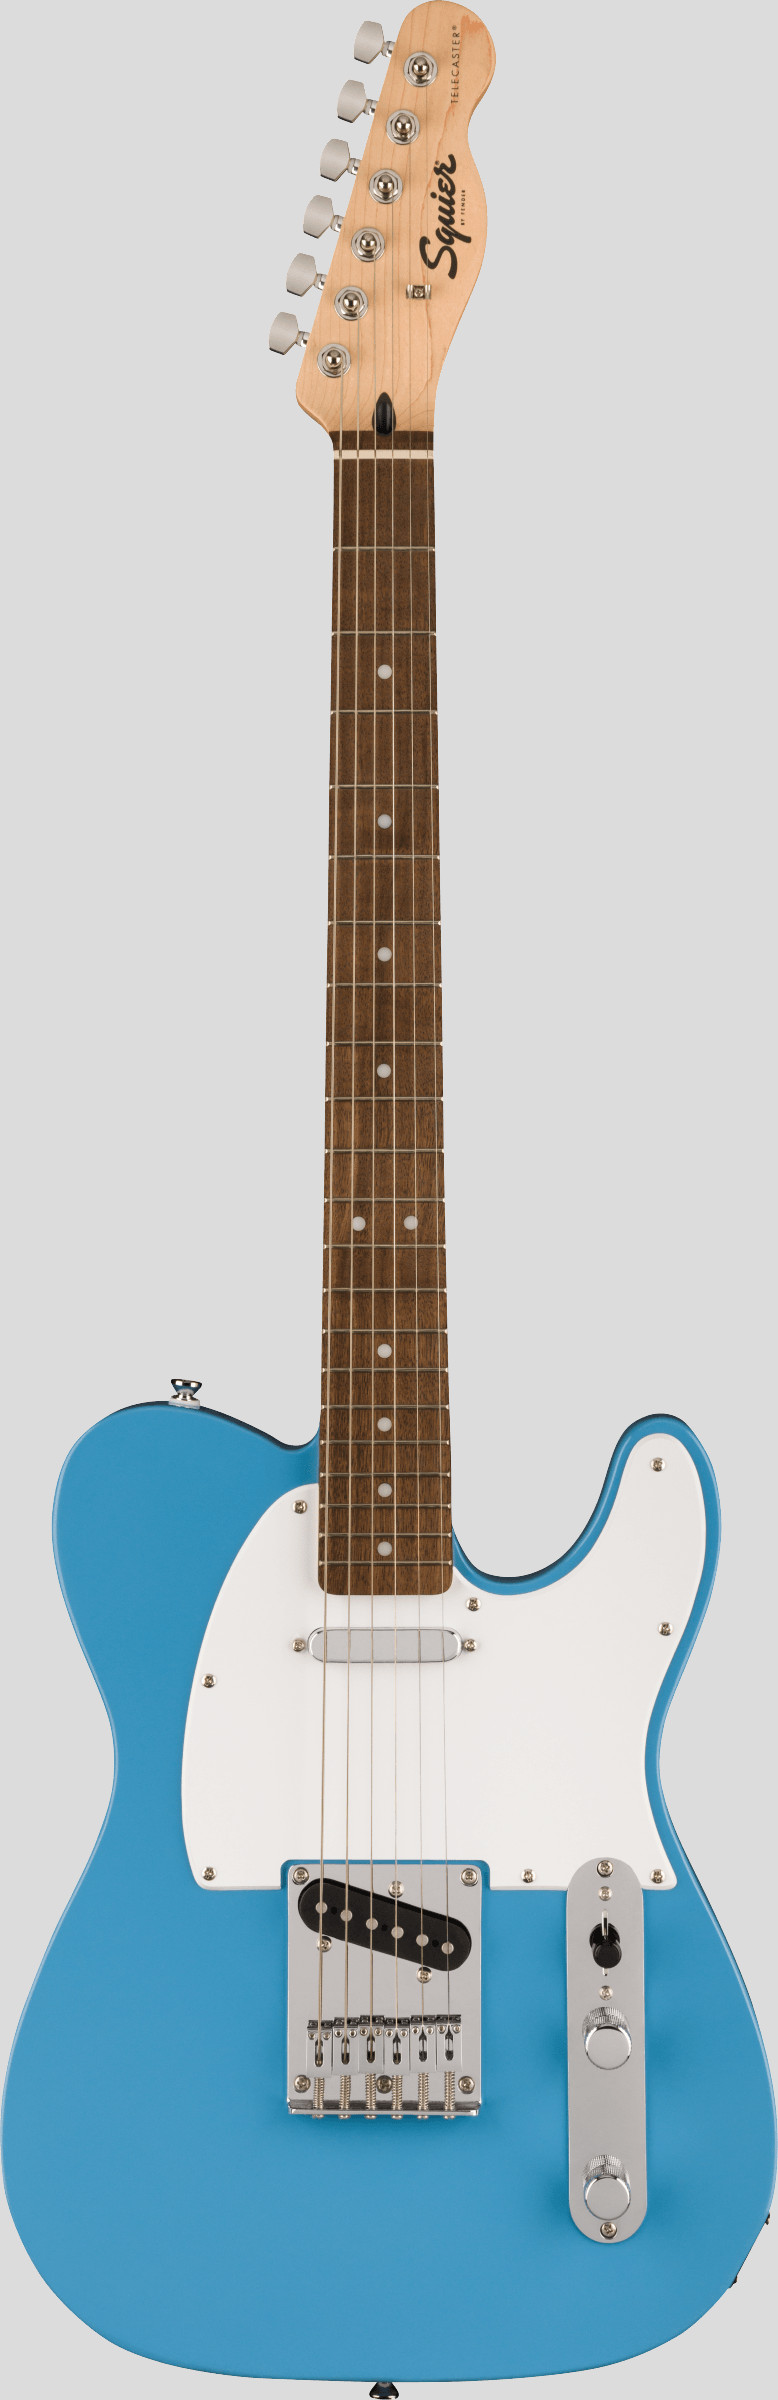 Squier by Fender Sonic Telecaster California Blue 1